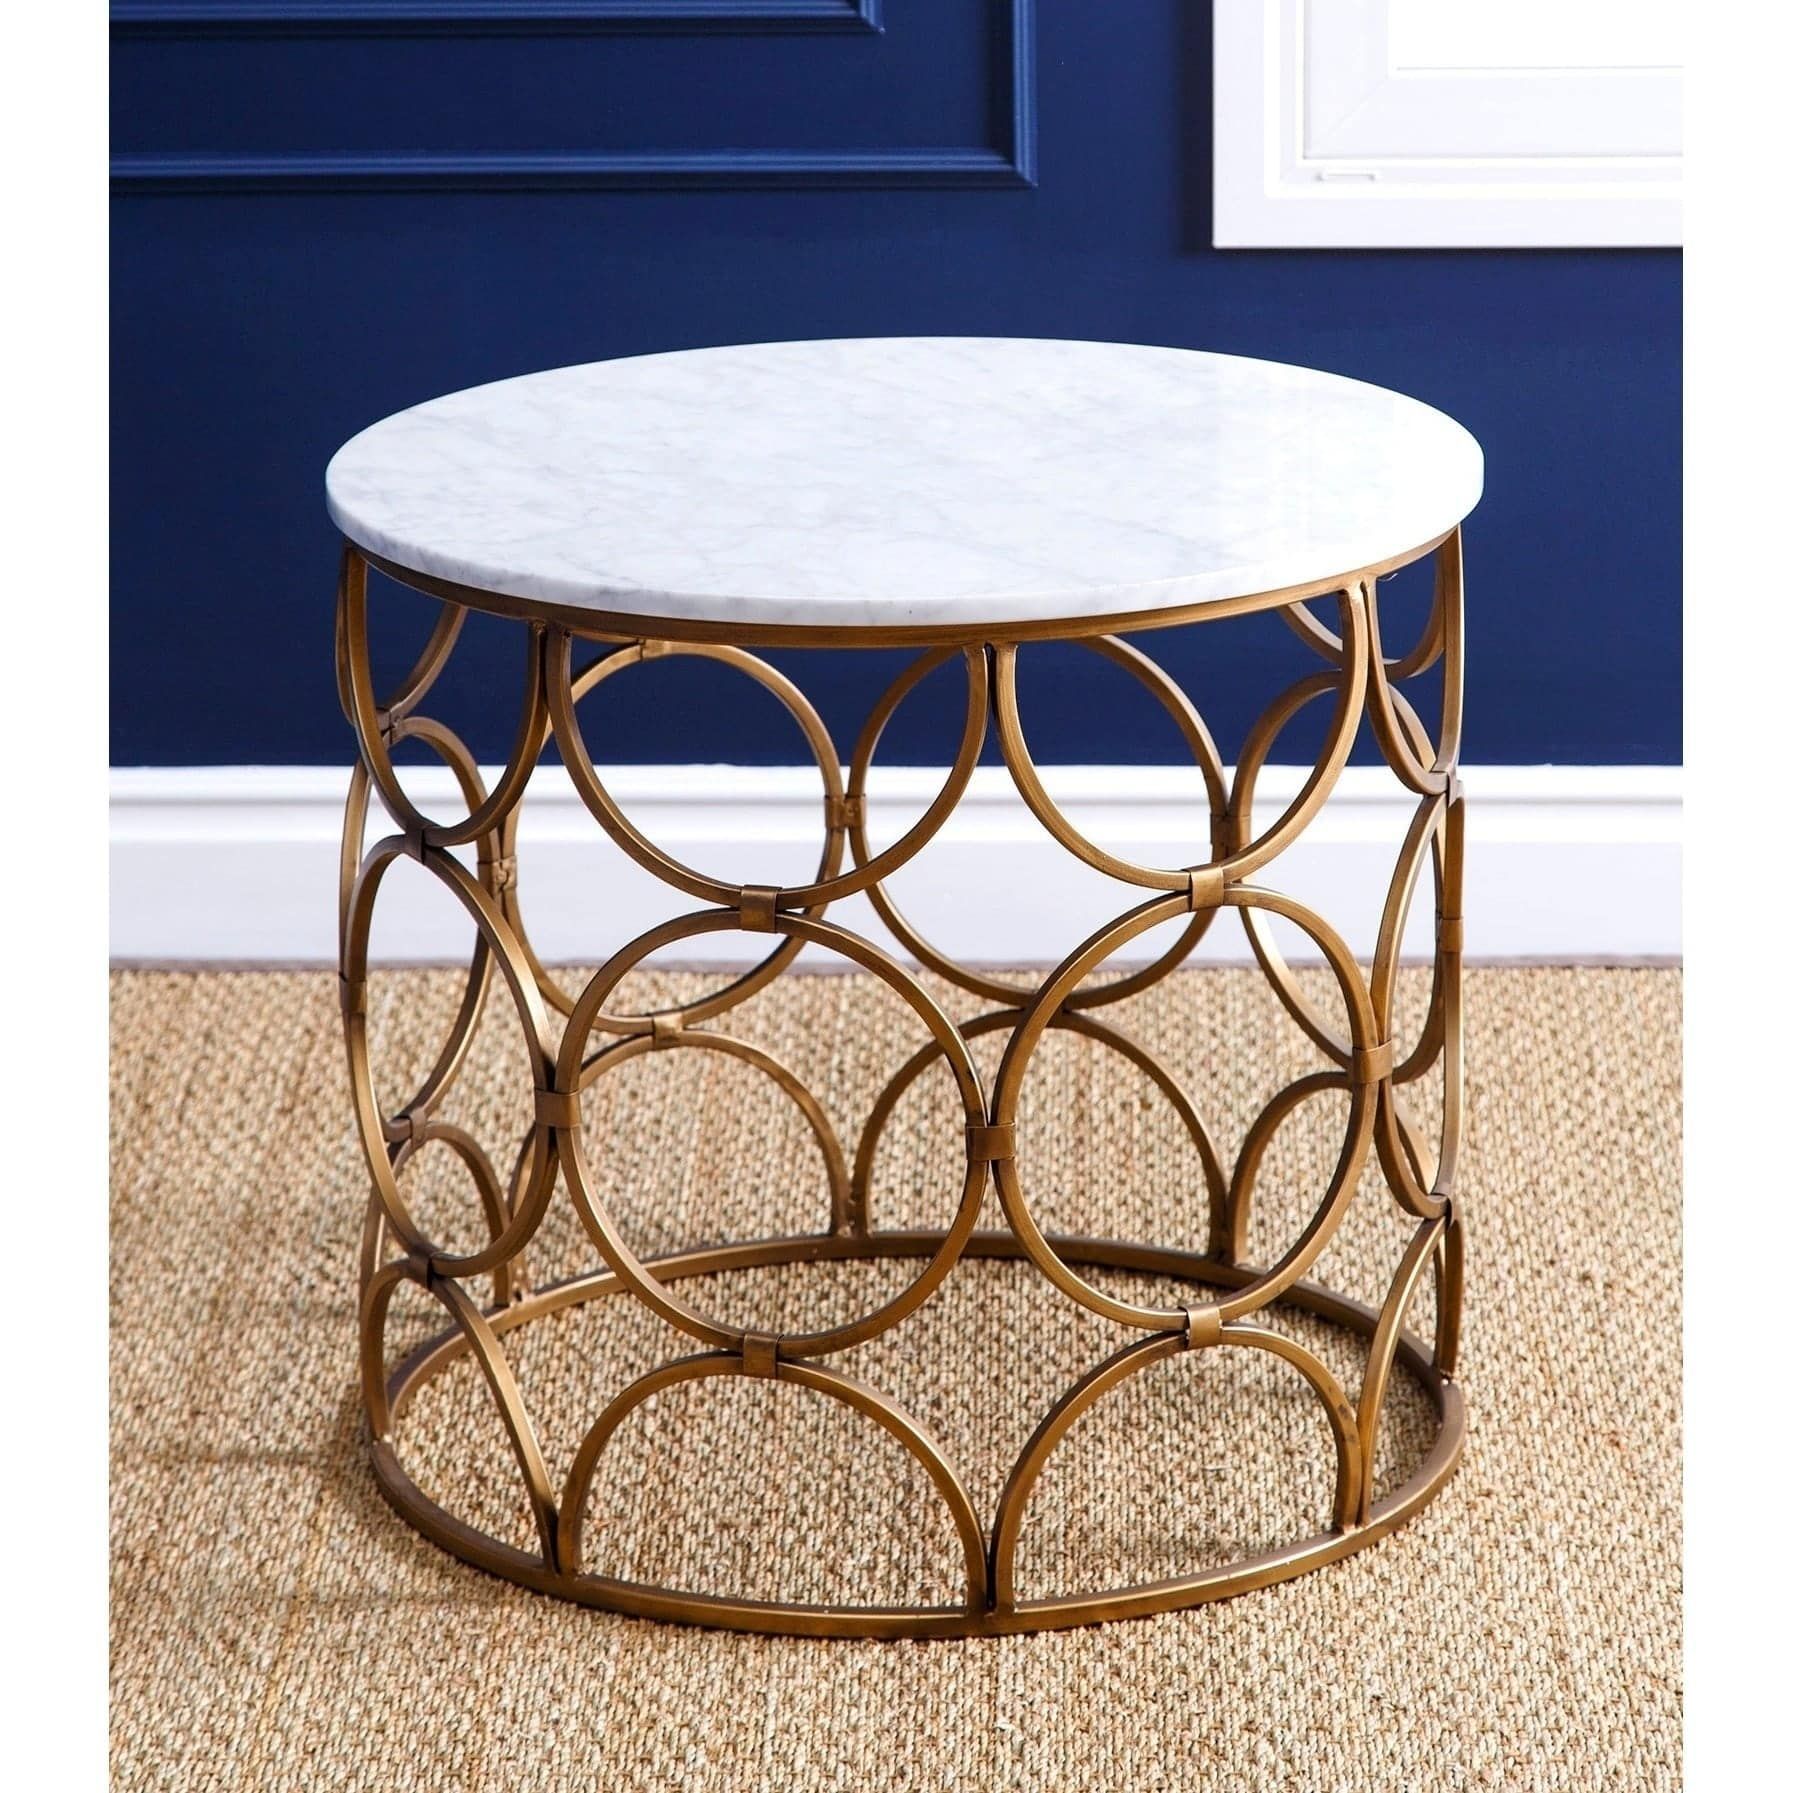 Our Best Living Room Furniture Deals | Faux Marble Coffee Table, Marble Pertaining To Modern Round Faux Marble Coffee Tables (Gallery 20 of 20)